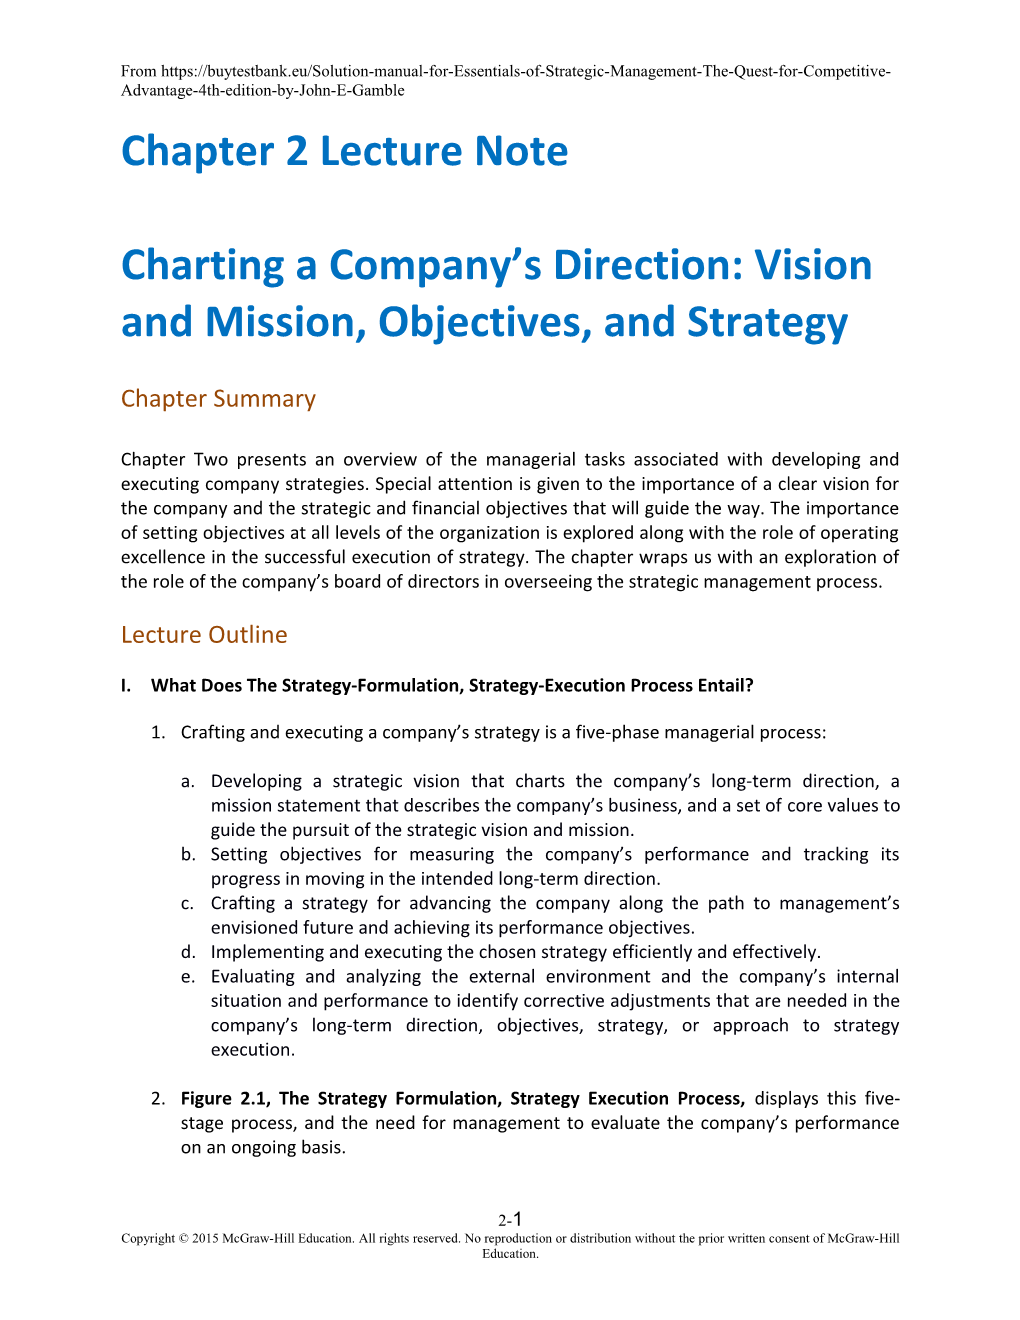 Charting a Company S Direction: Vision and Mission, Objectives, and Strategy